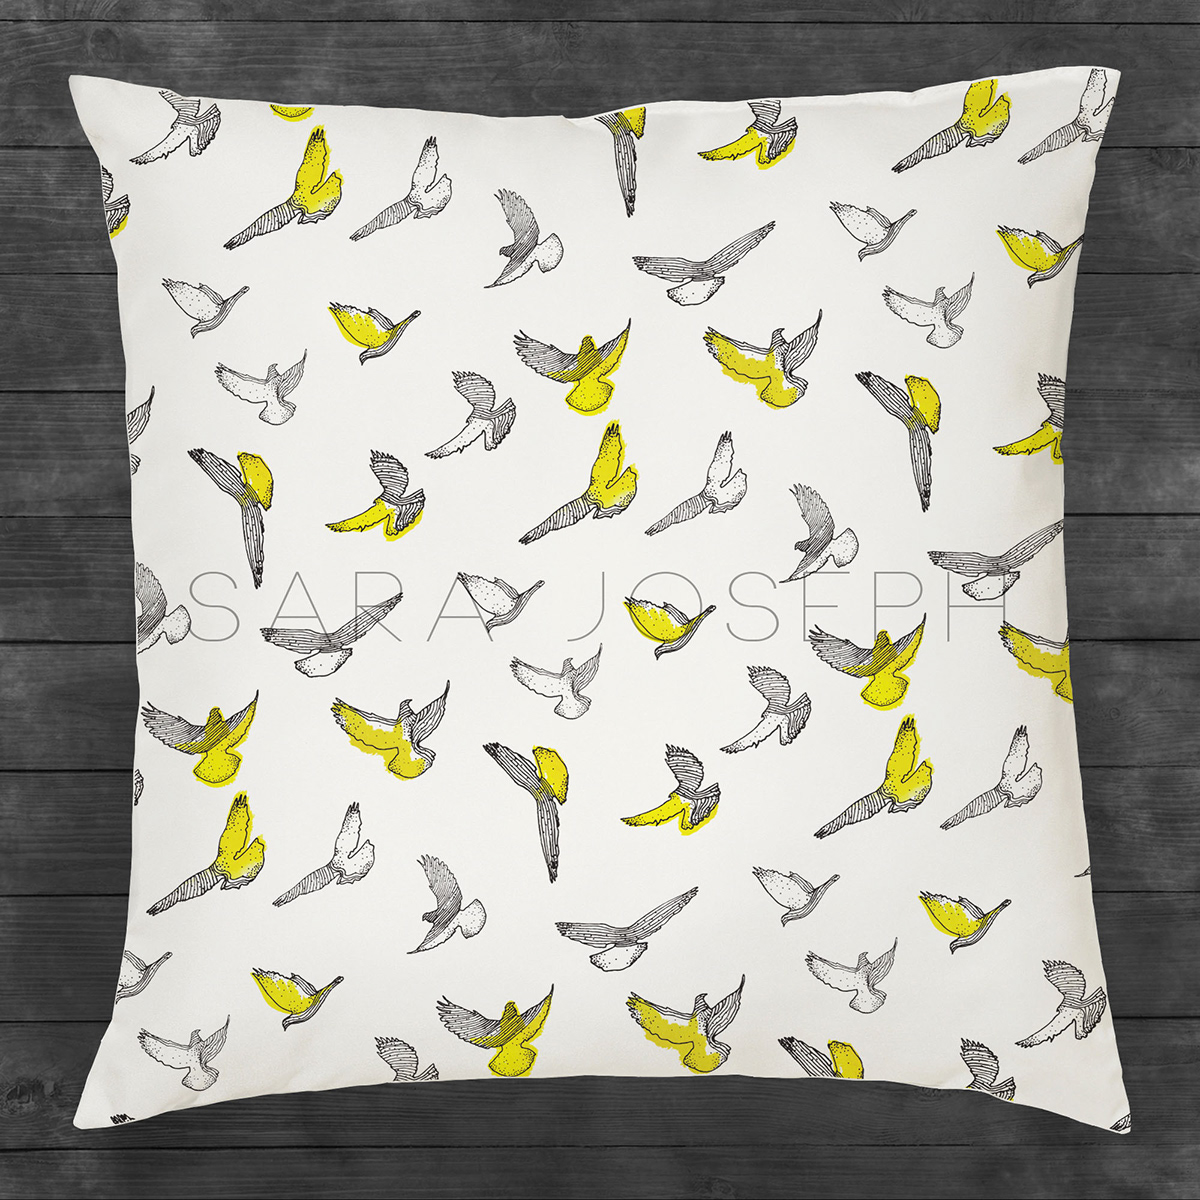 surface pattern design design upholstery Cushion Covers